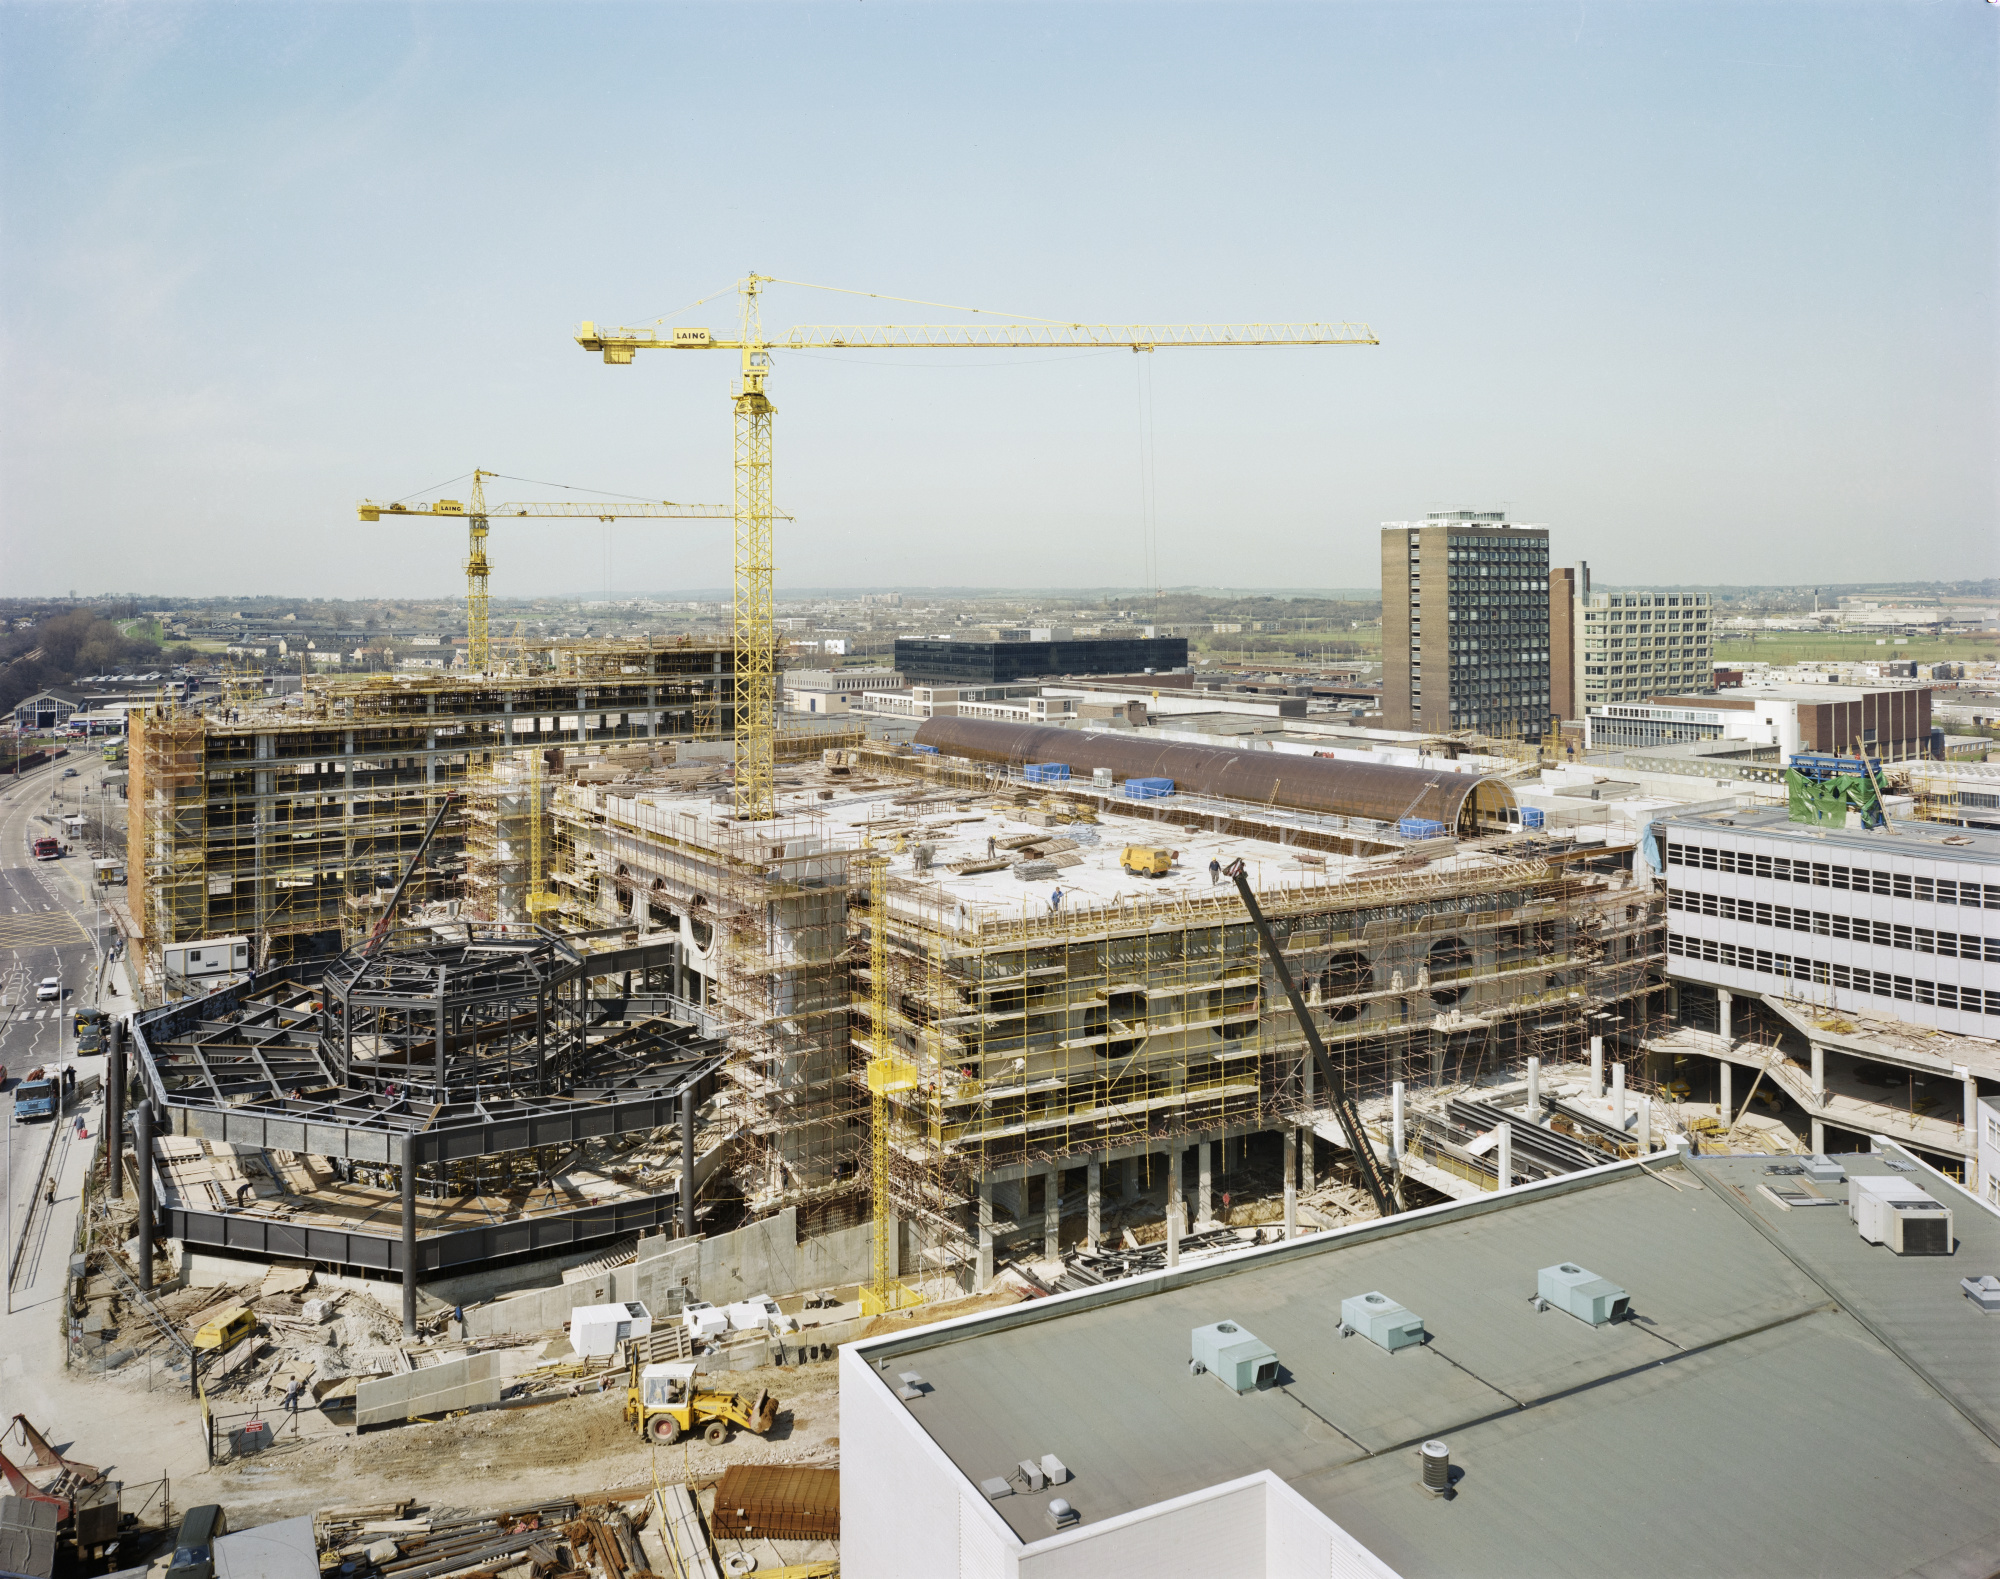 Colour photograph taken from the roof of a building showing the Eastgate Centre under construction. The partially constructed buildings are covered with scaffolding and two yellow cranes rise above the site.